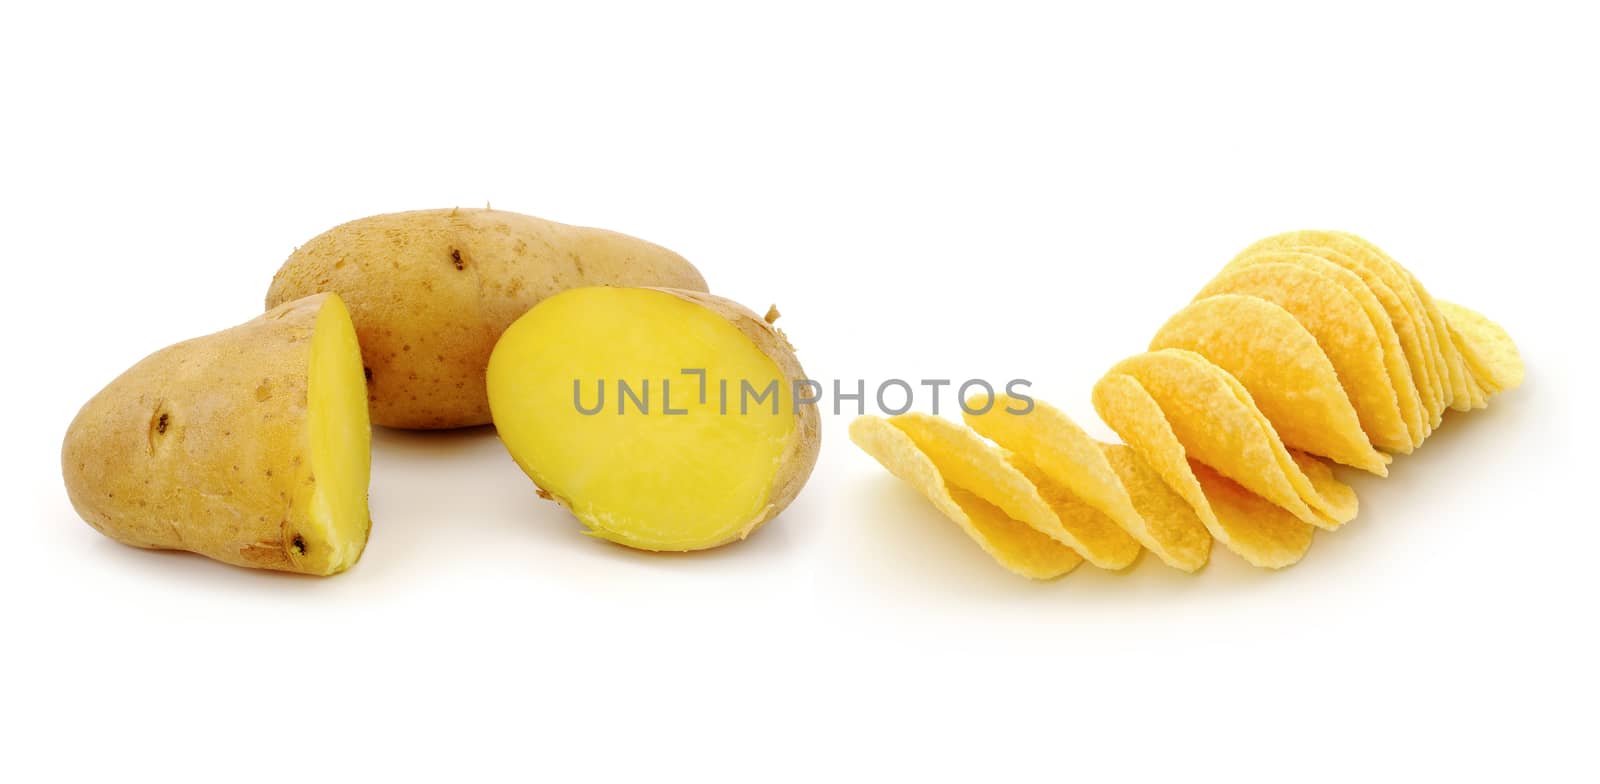 potato and Potato chips isolated on white background 